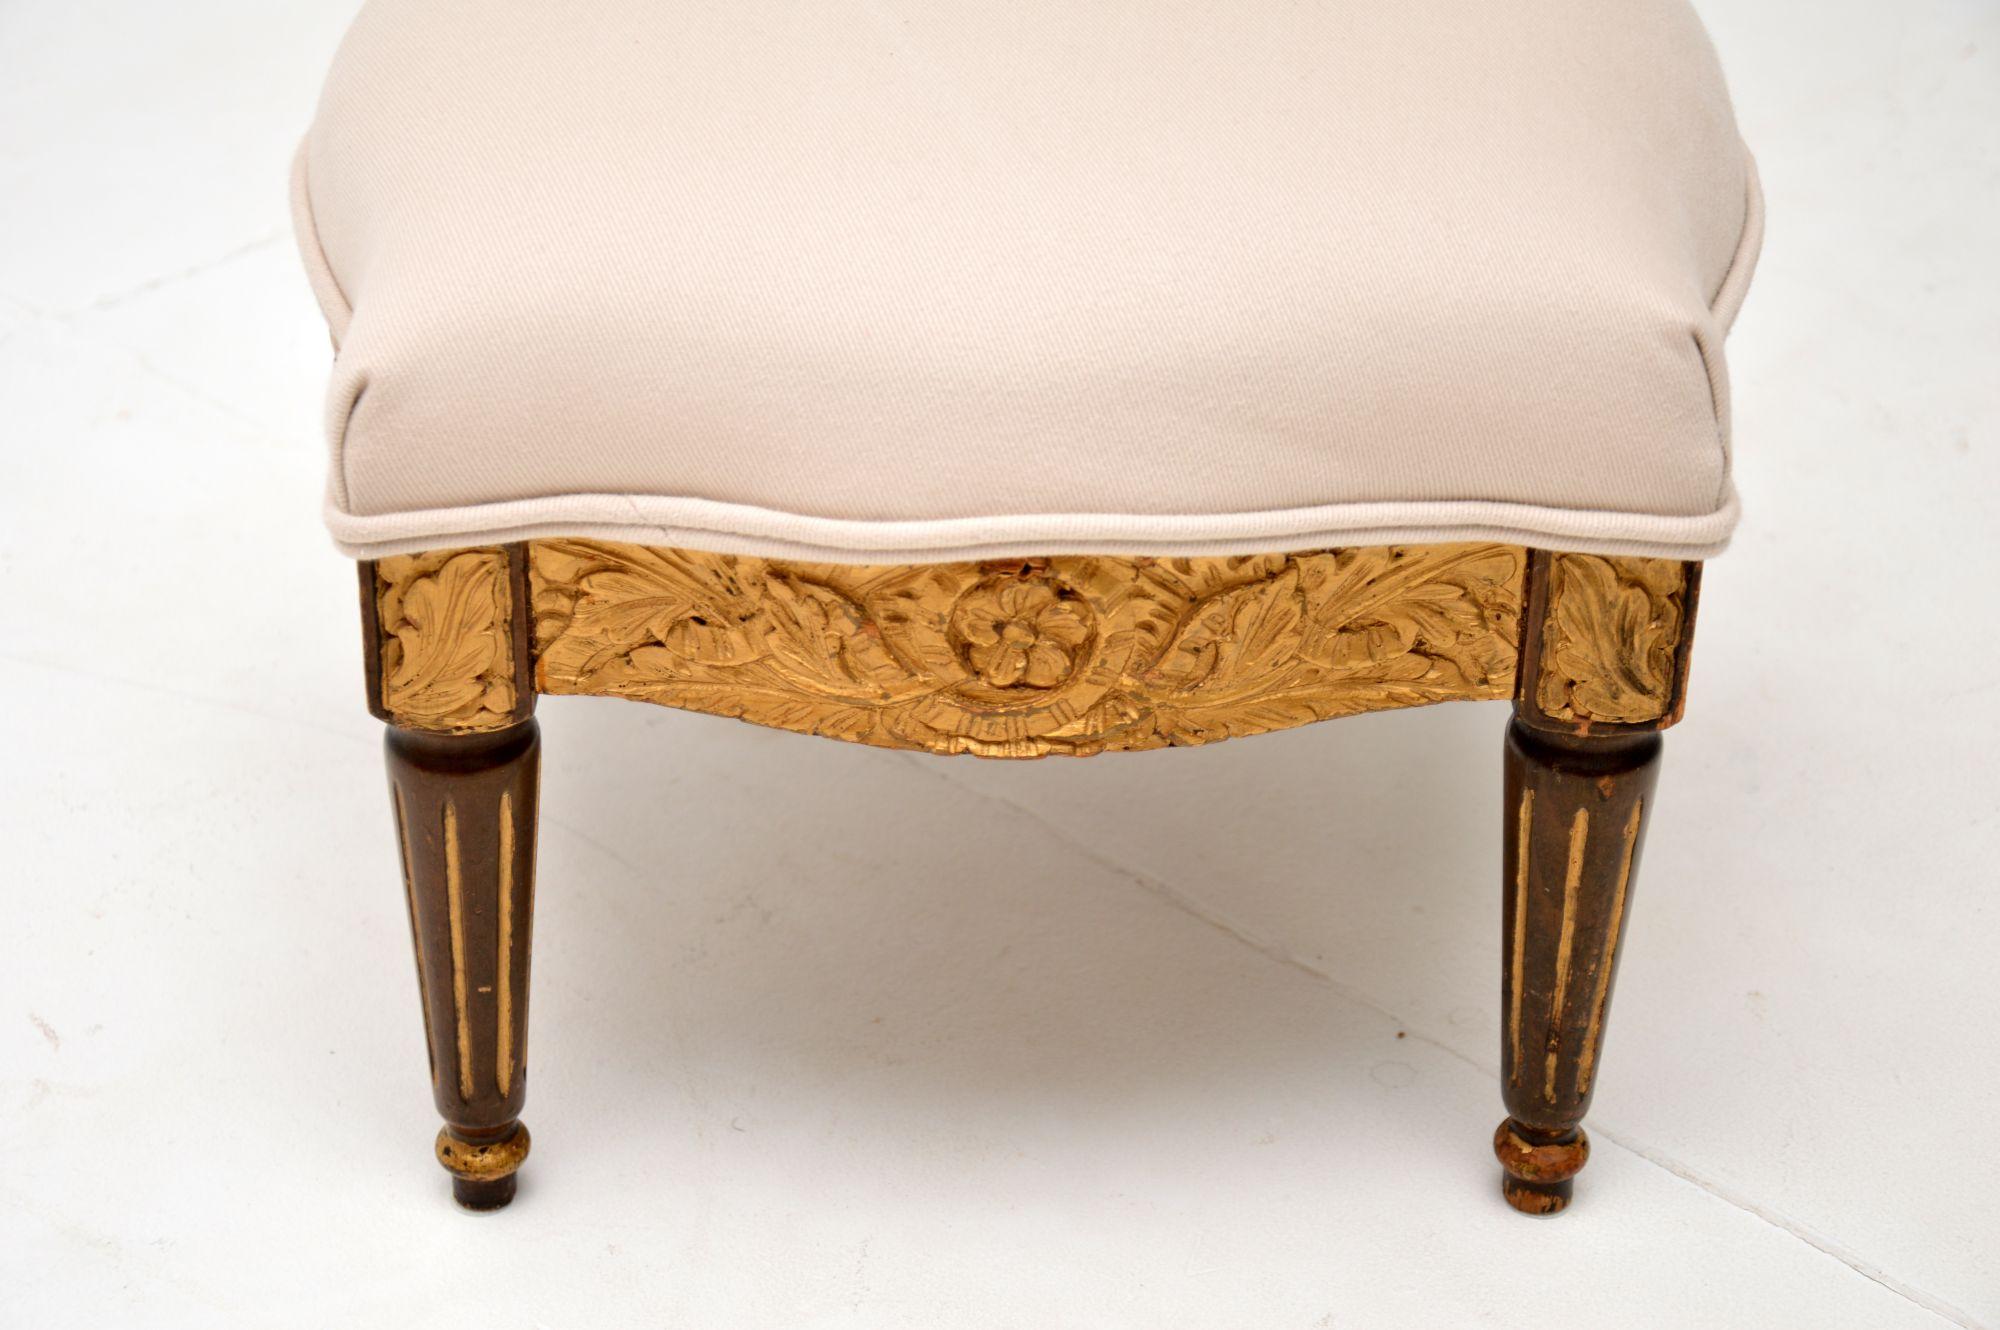 Giltwood Antique French Carved Gilt Wood Stool